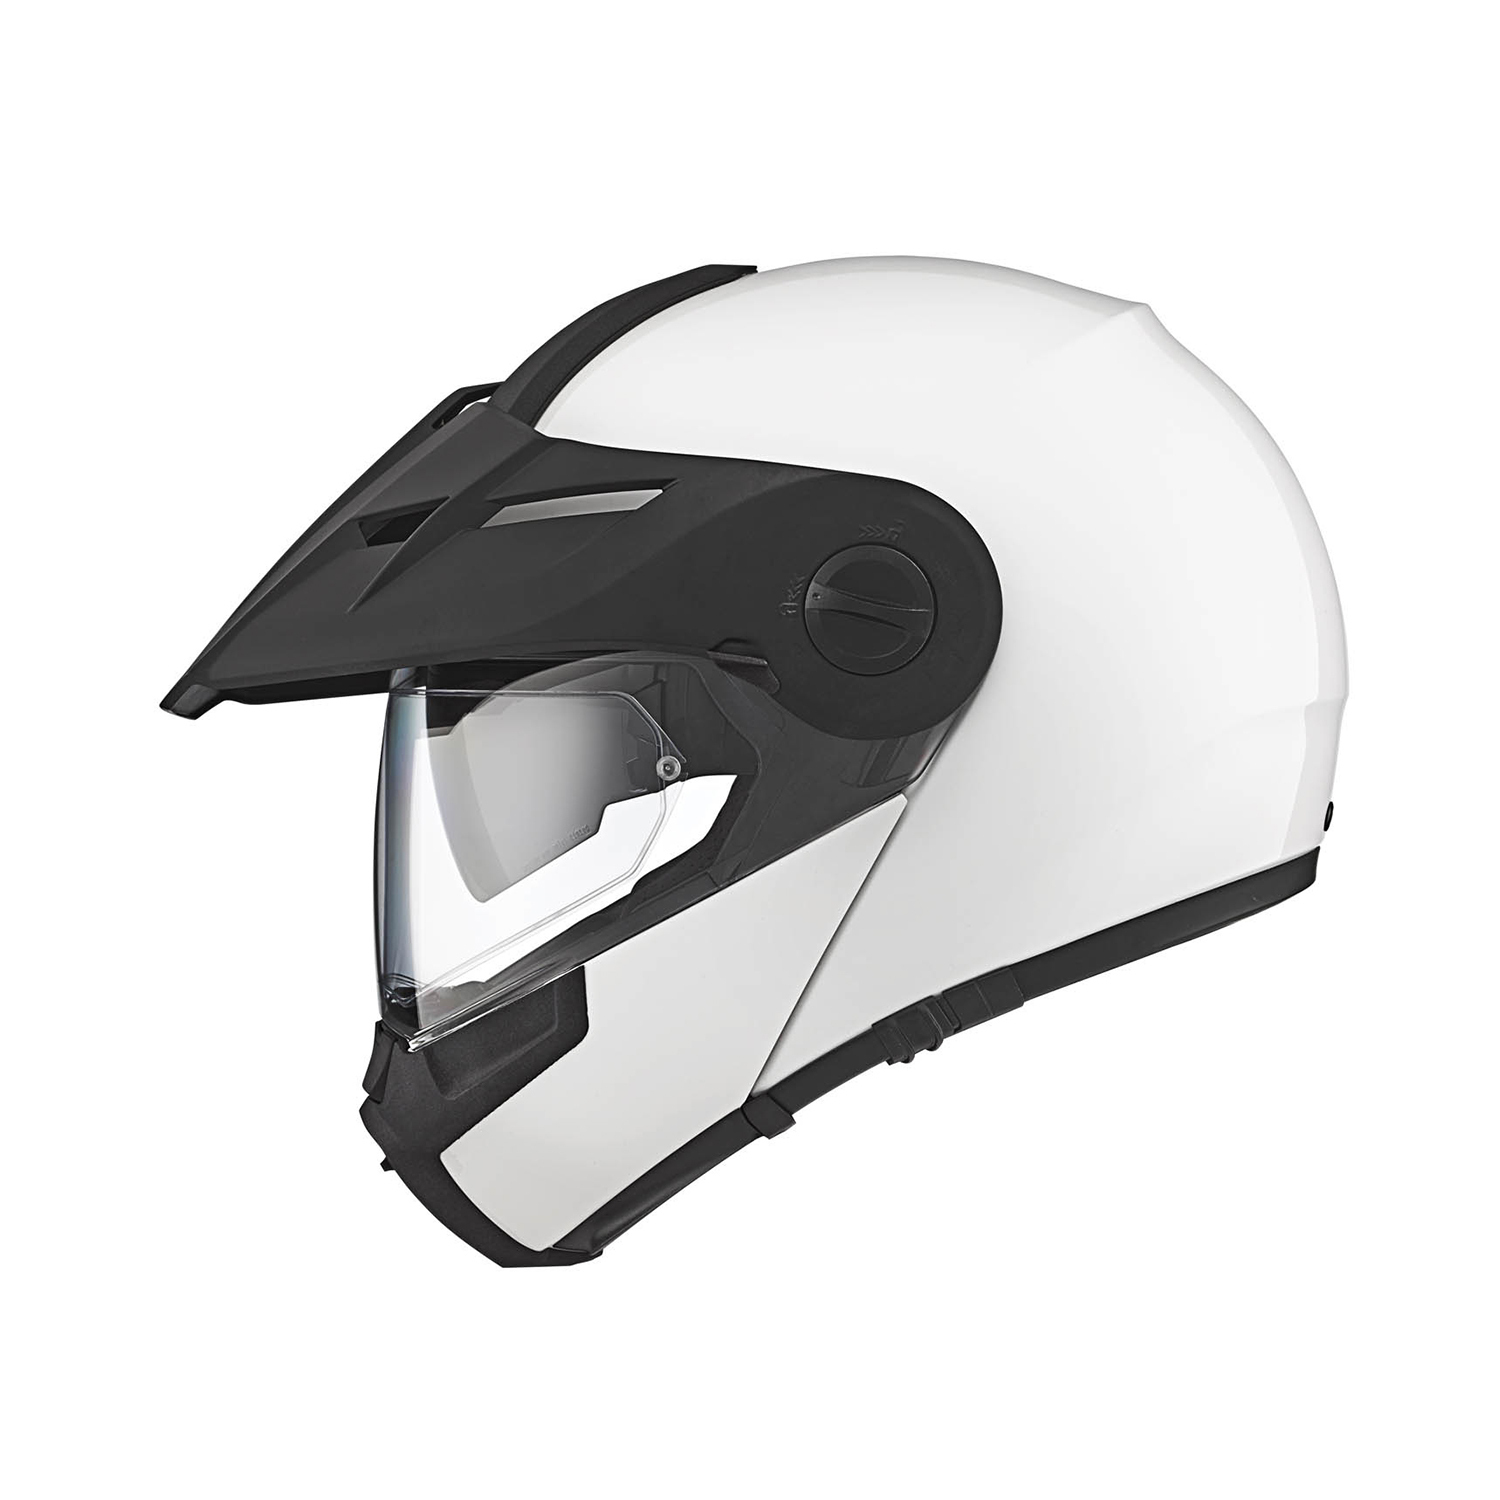 Schuberth E1 Adventure Helmet Glossy White - Available in Various Sizes